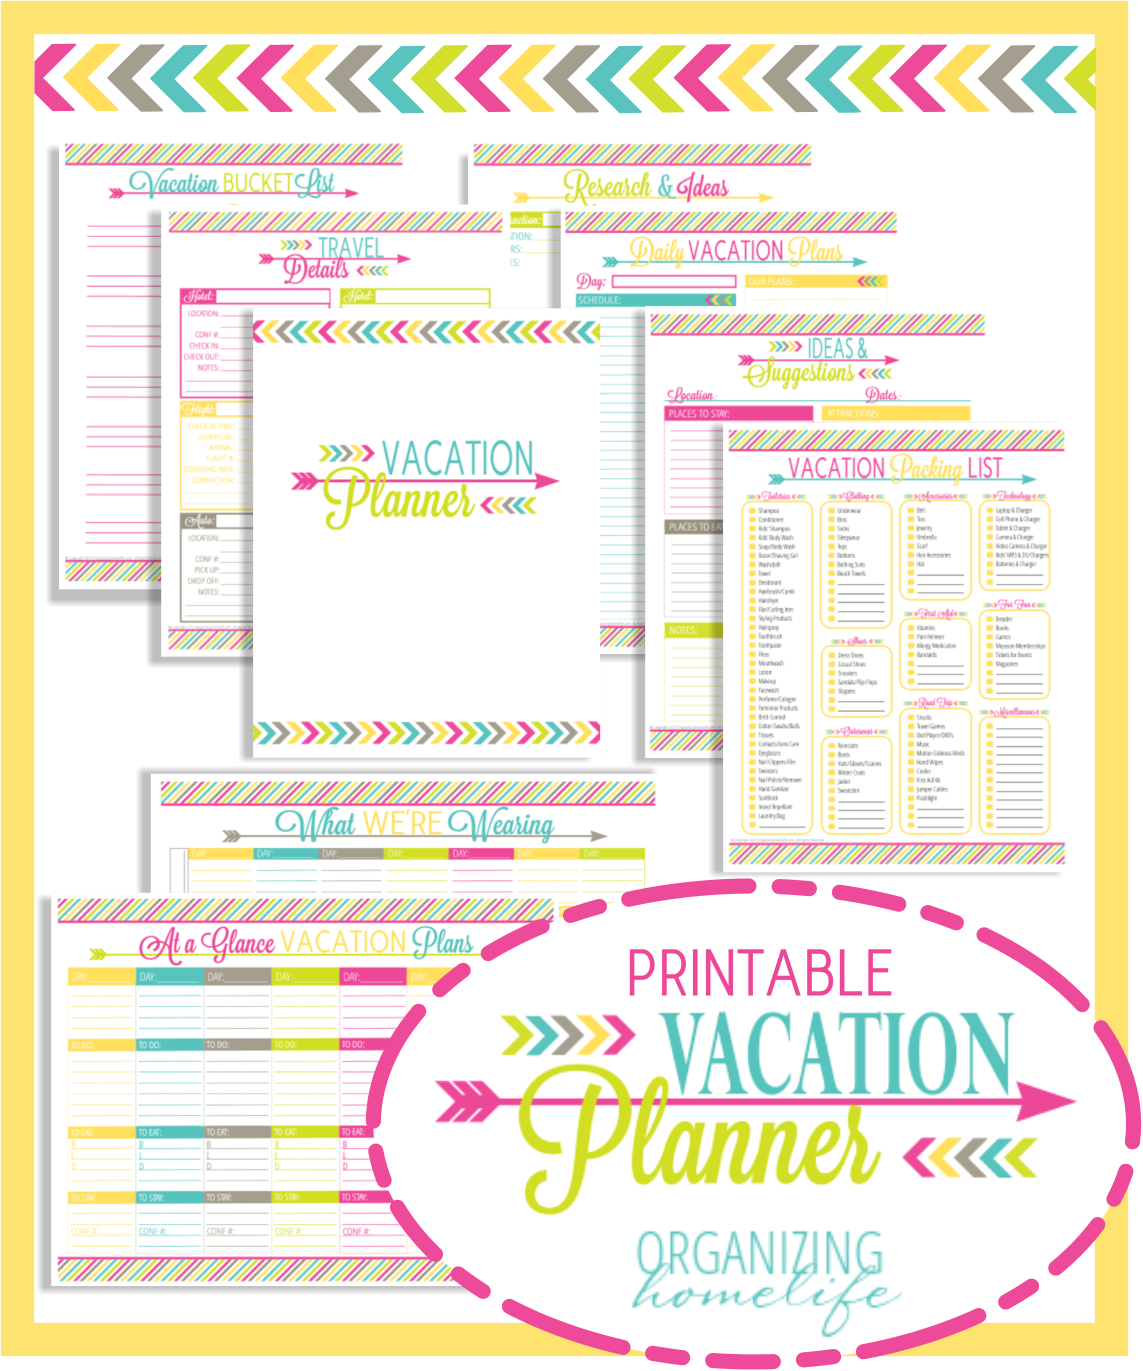 7-best-images-of-family-vacation-printables-free-printable-work